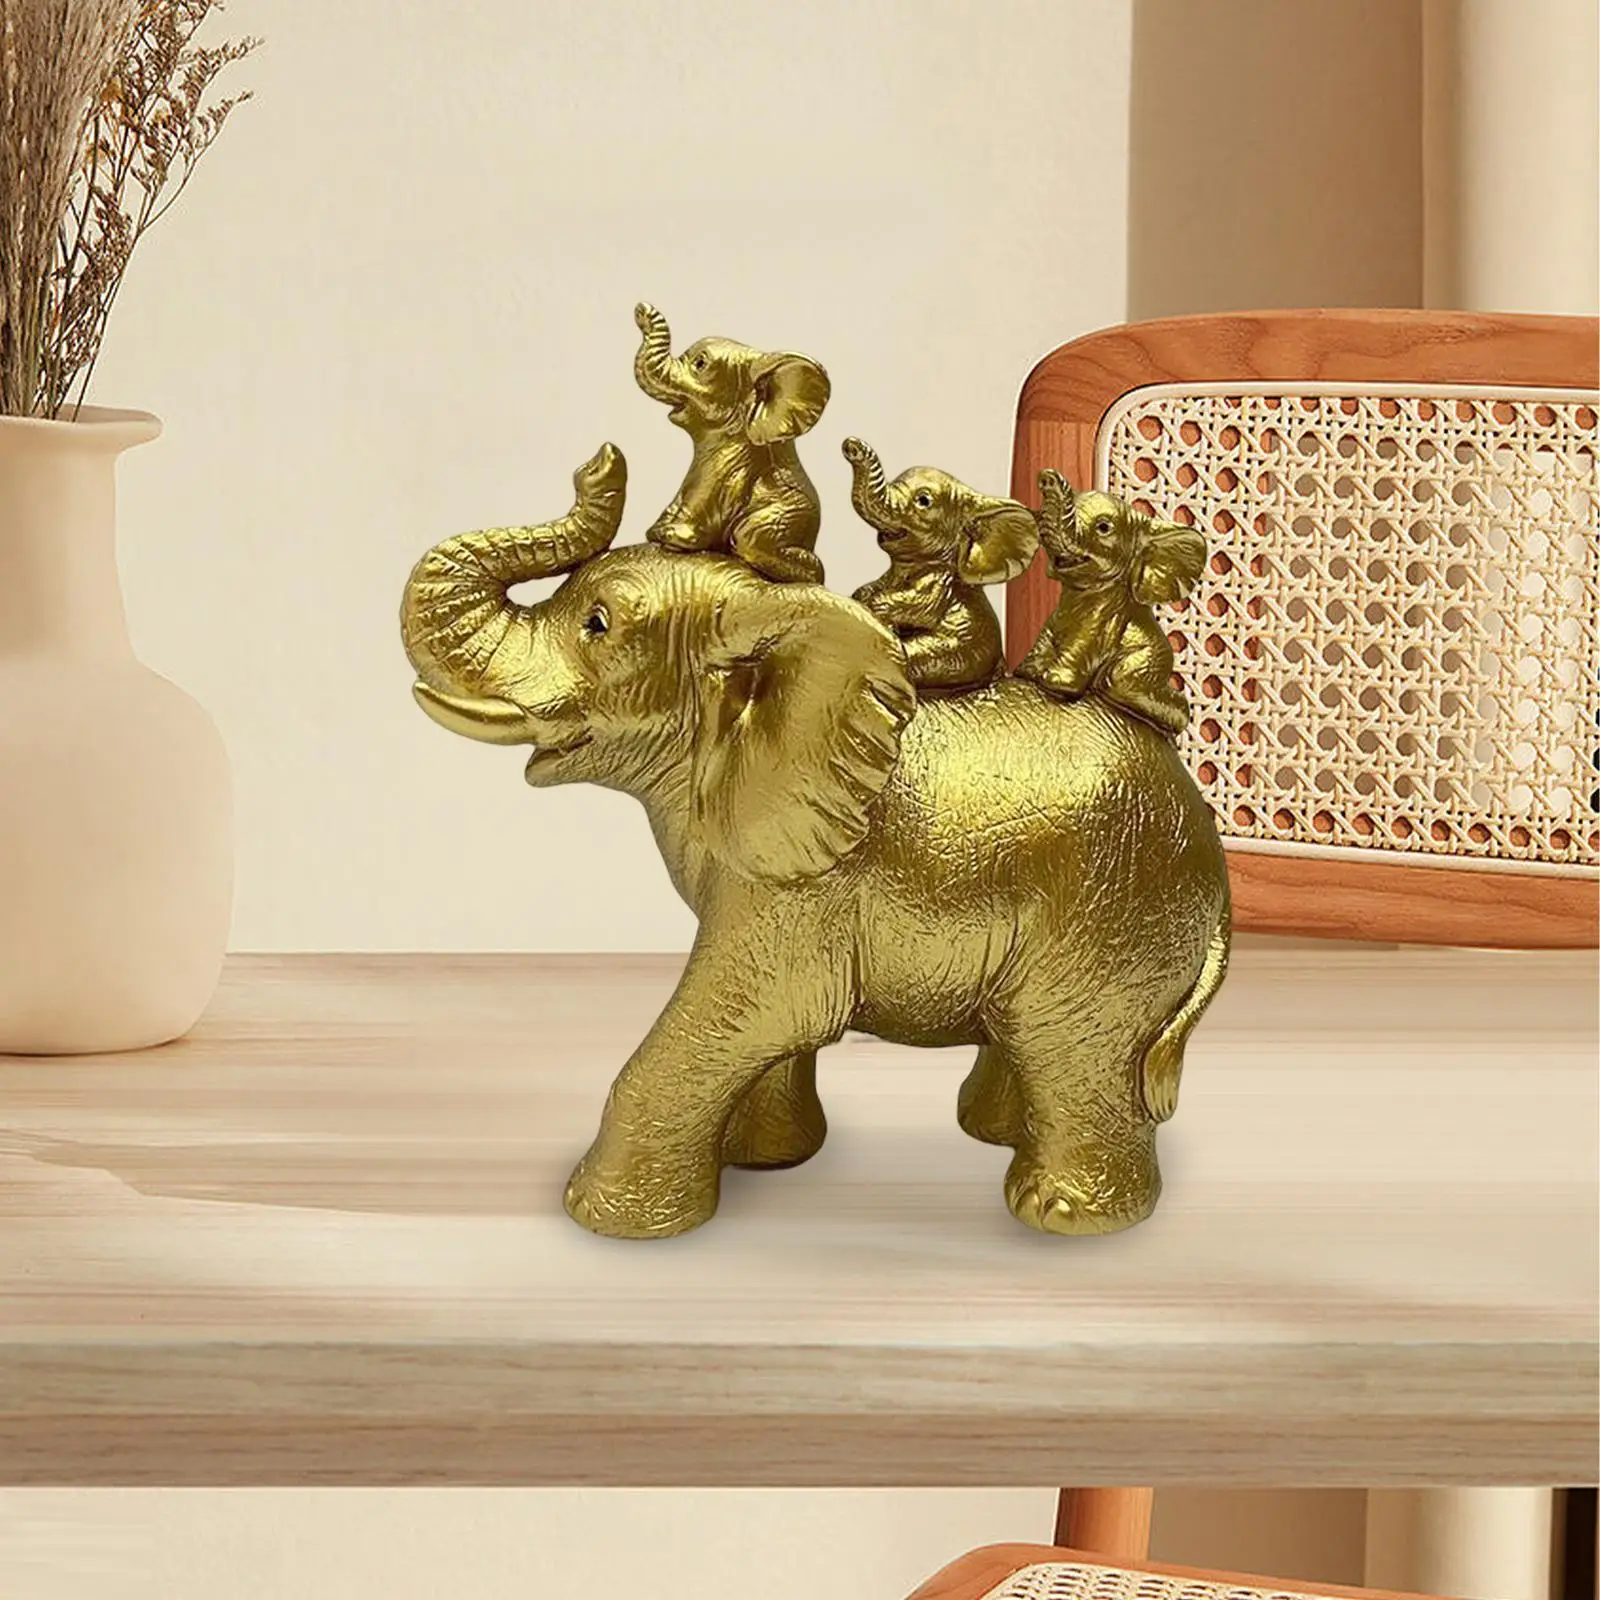 

3 Baby Elephants Riding AN Elephant Statues Animals Sculptures Resin Figurines for Office Wedding Home Housewarming Farmhouse